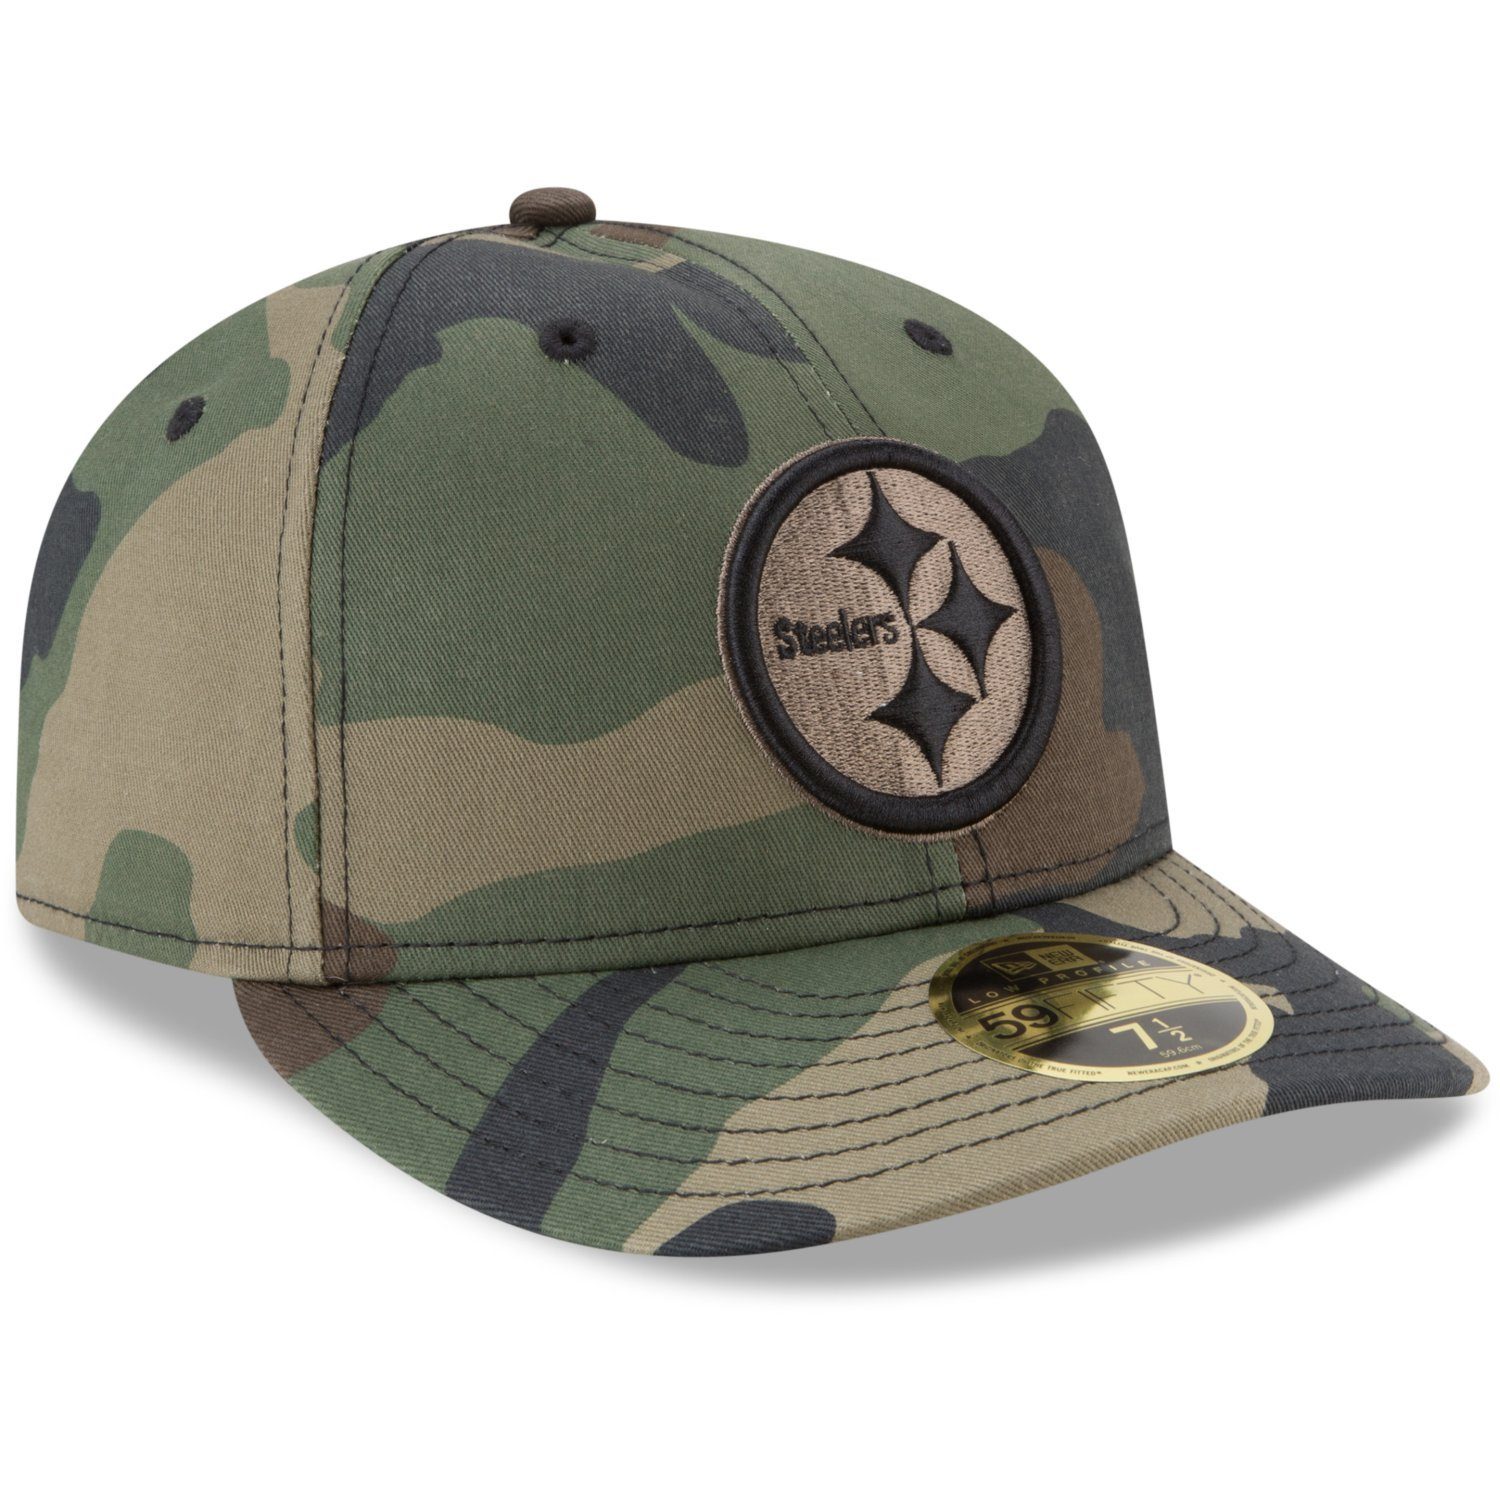 NFL Steelers Era New Cap 59Fifty woodland Profile Pittsburgh Fitted Low Teams